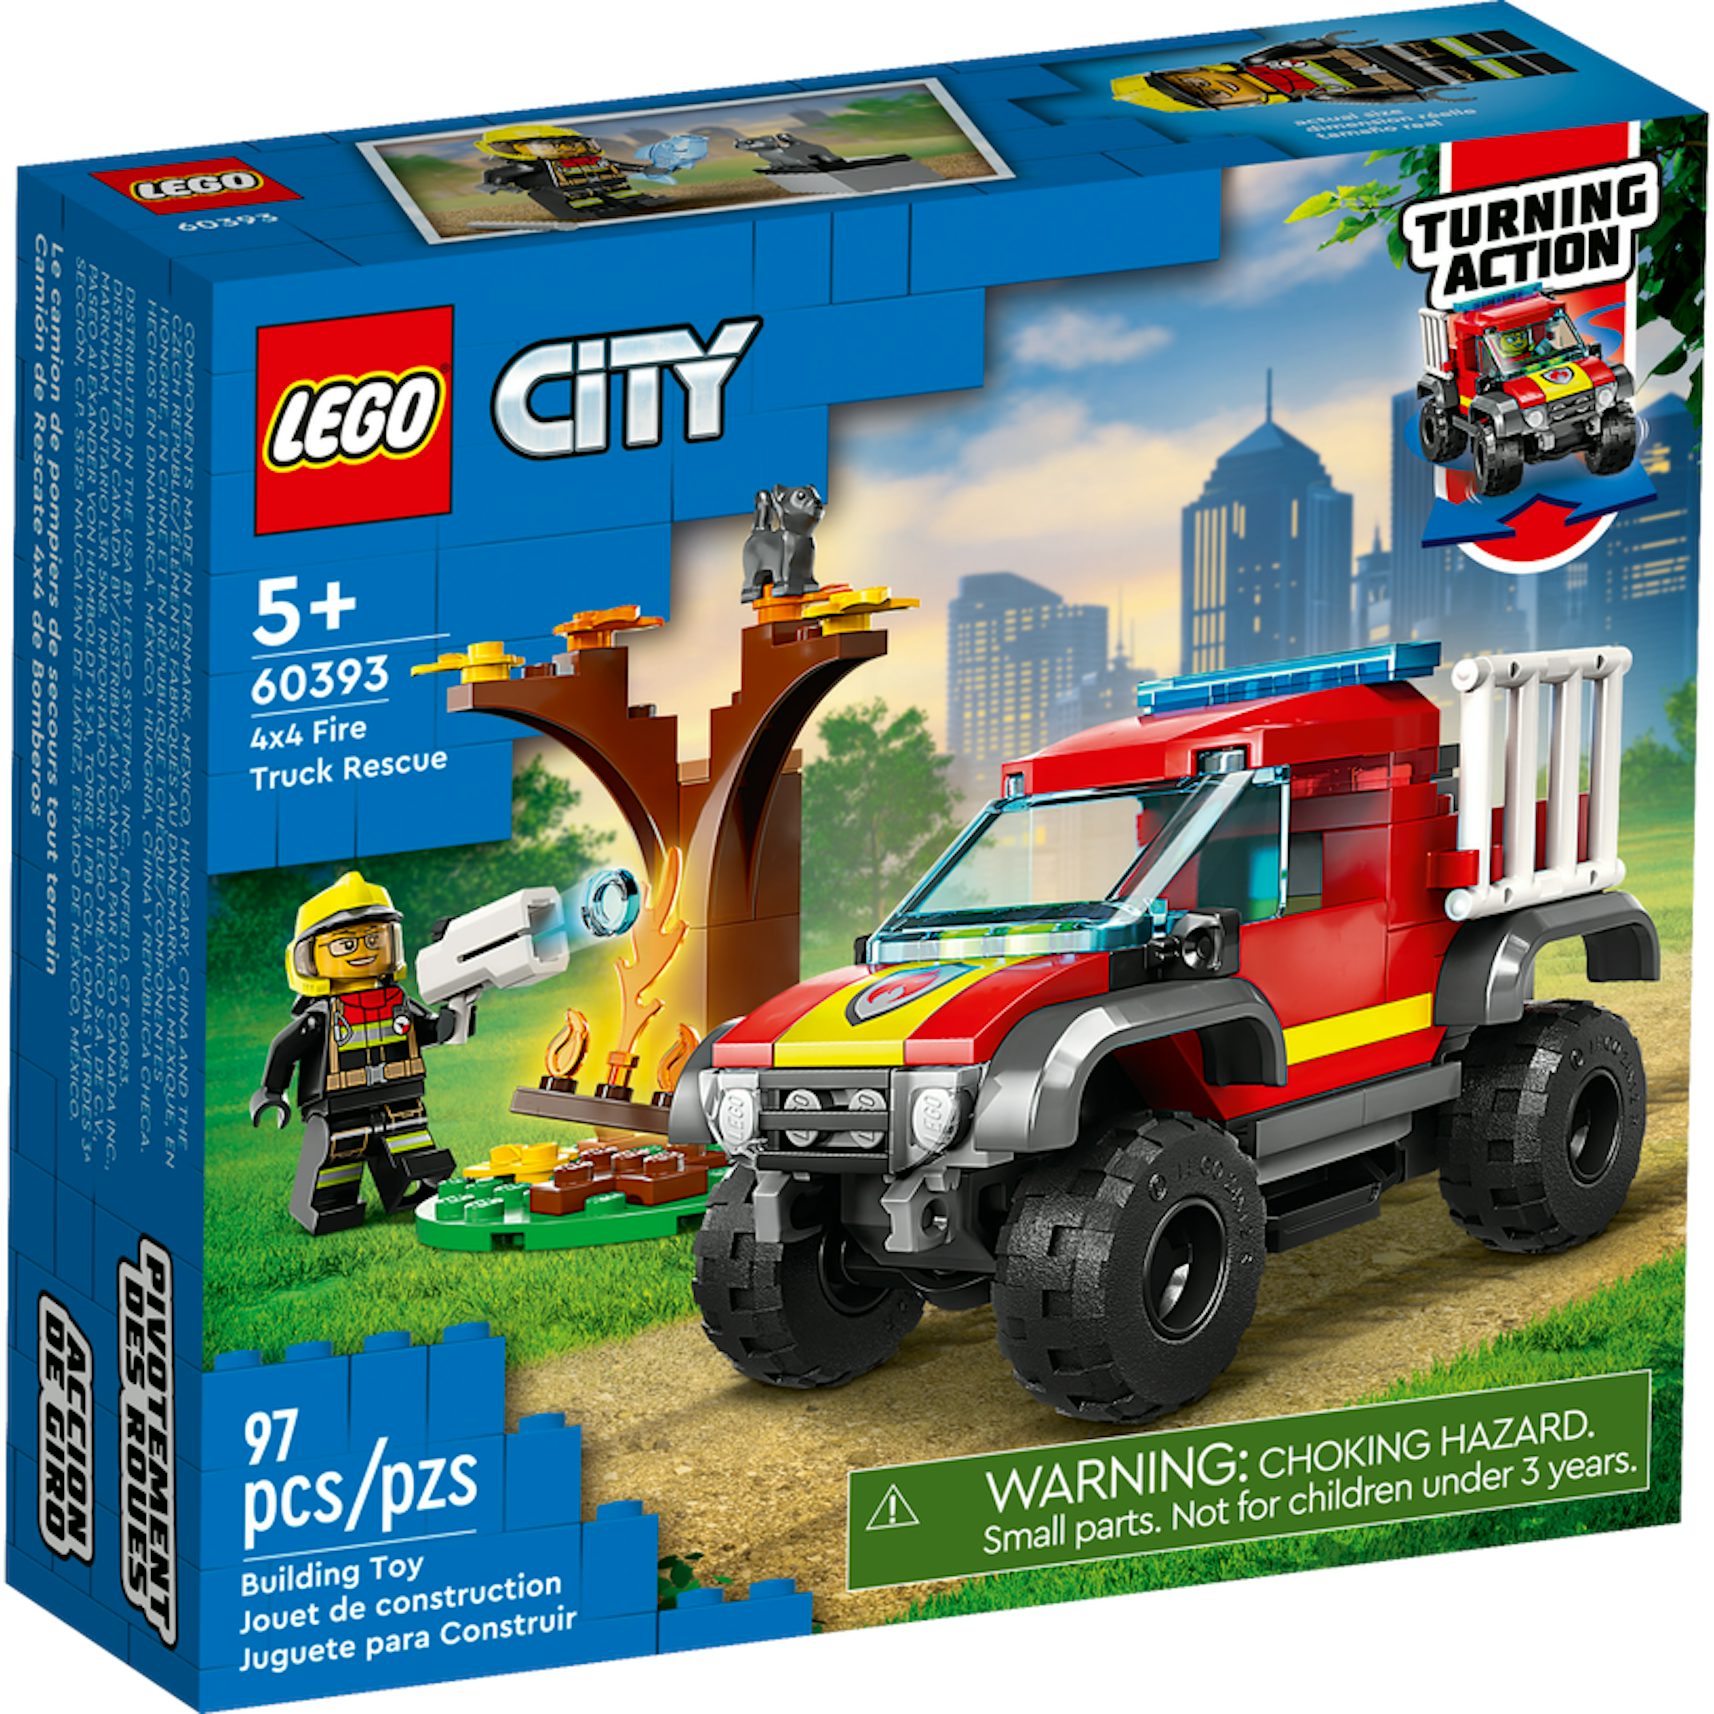  LEGO City Fire Station 60215 Fire Rescue Tower